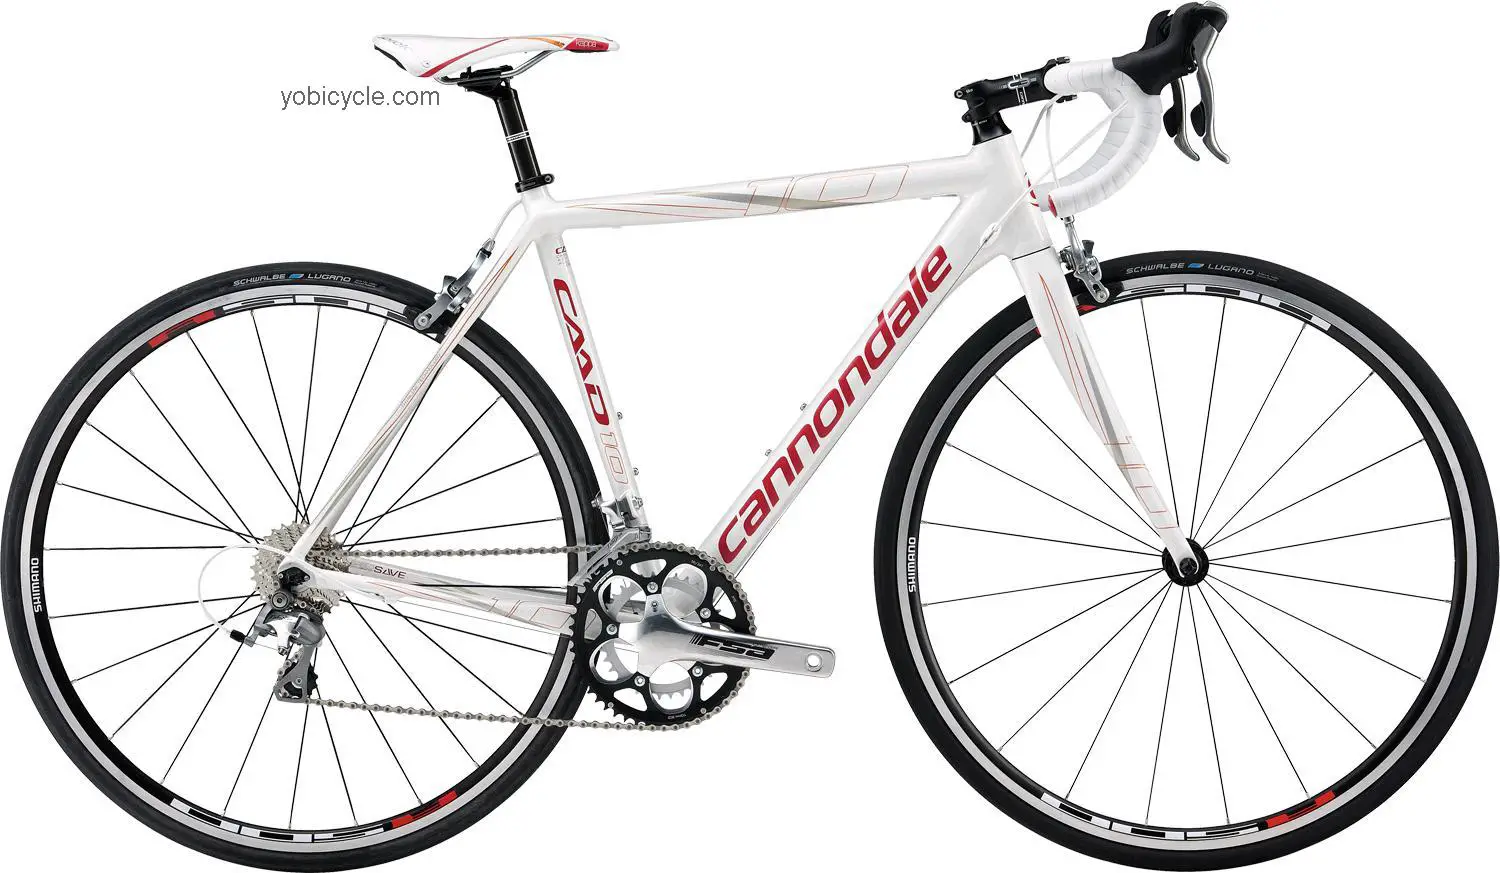 Cannondale CAAD10 Womens 6 Tiagra 2013 comparison online with competitors